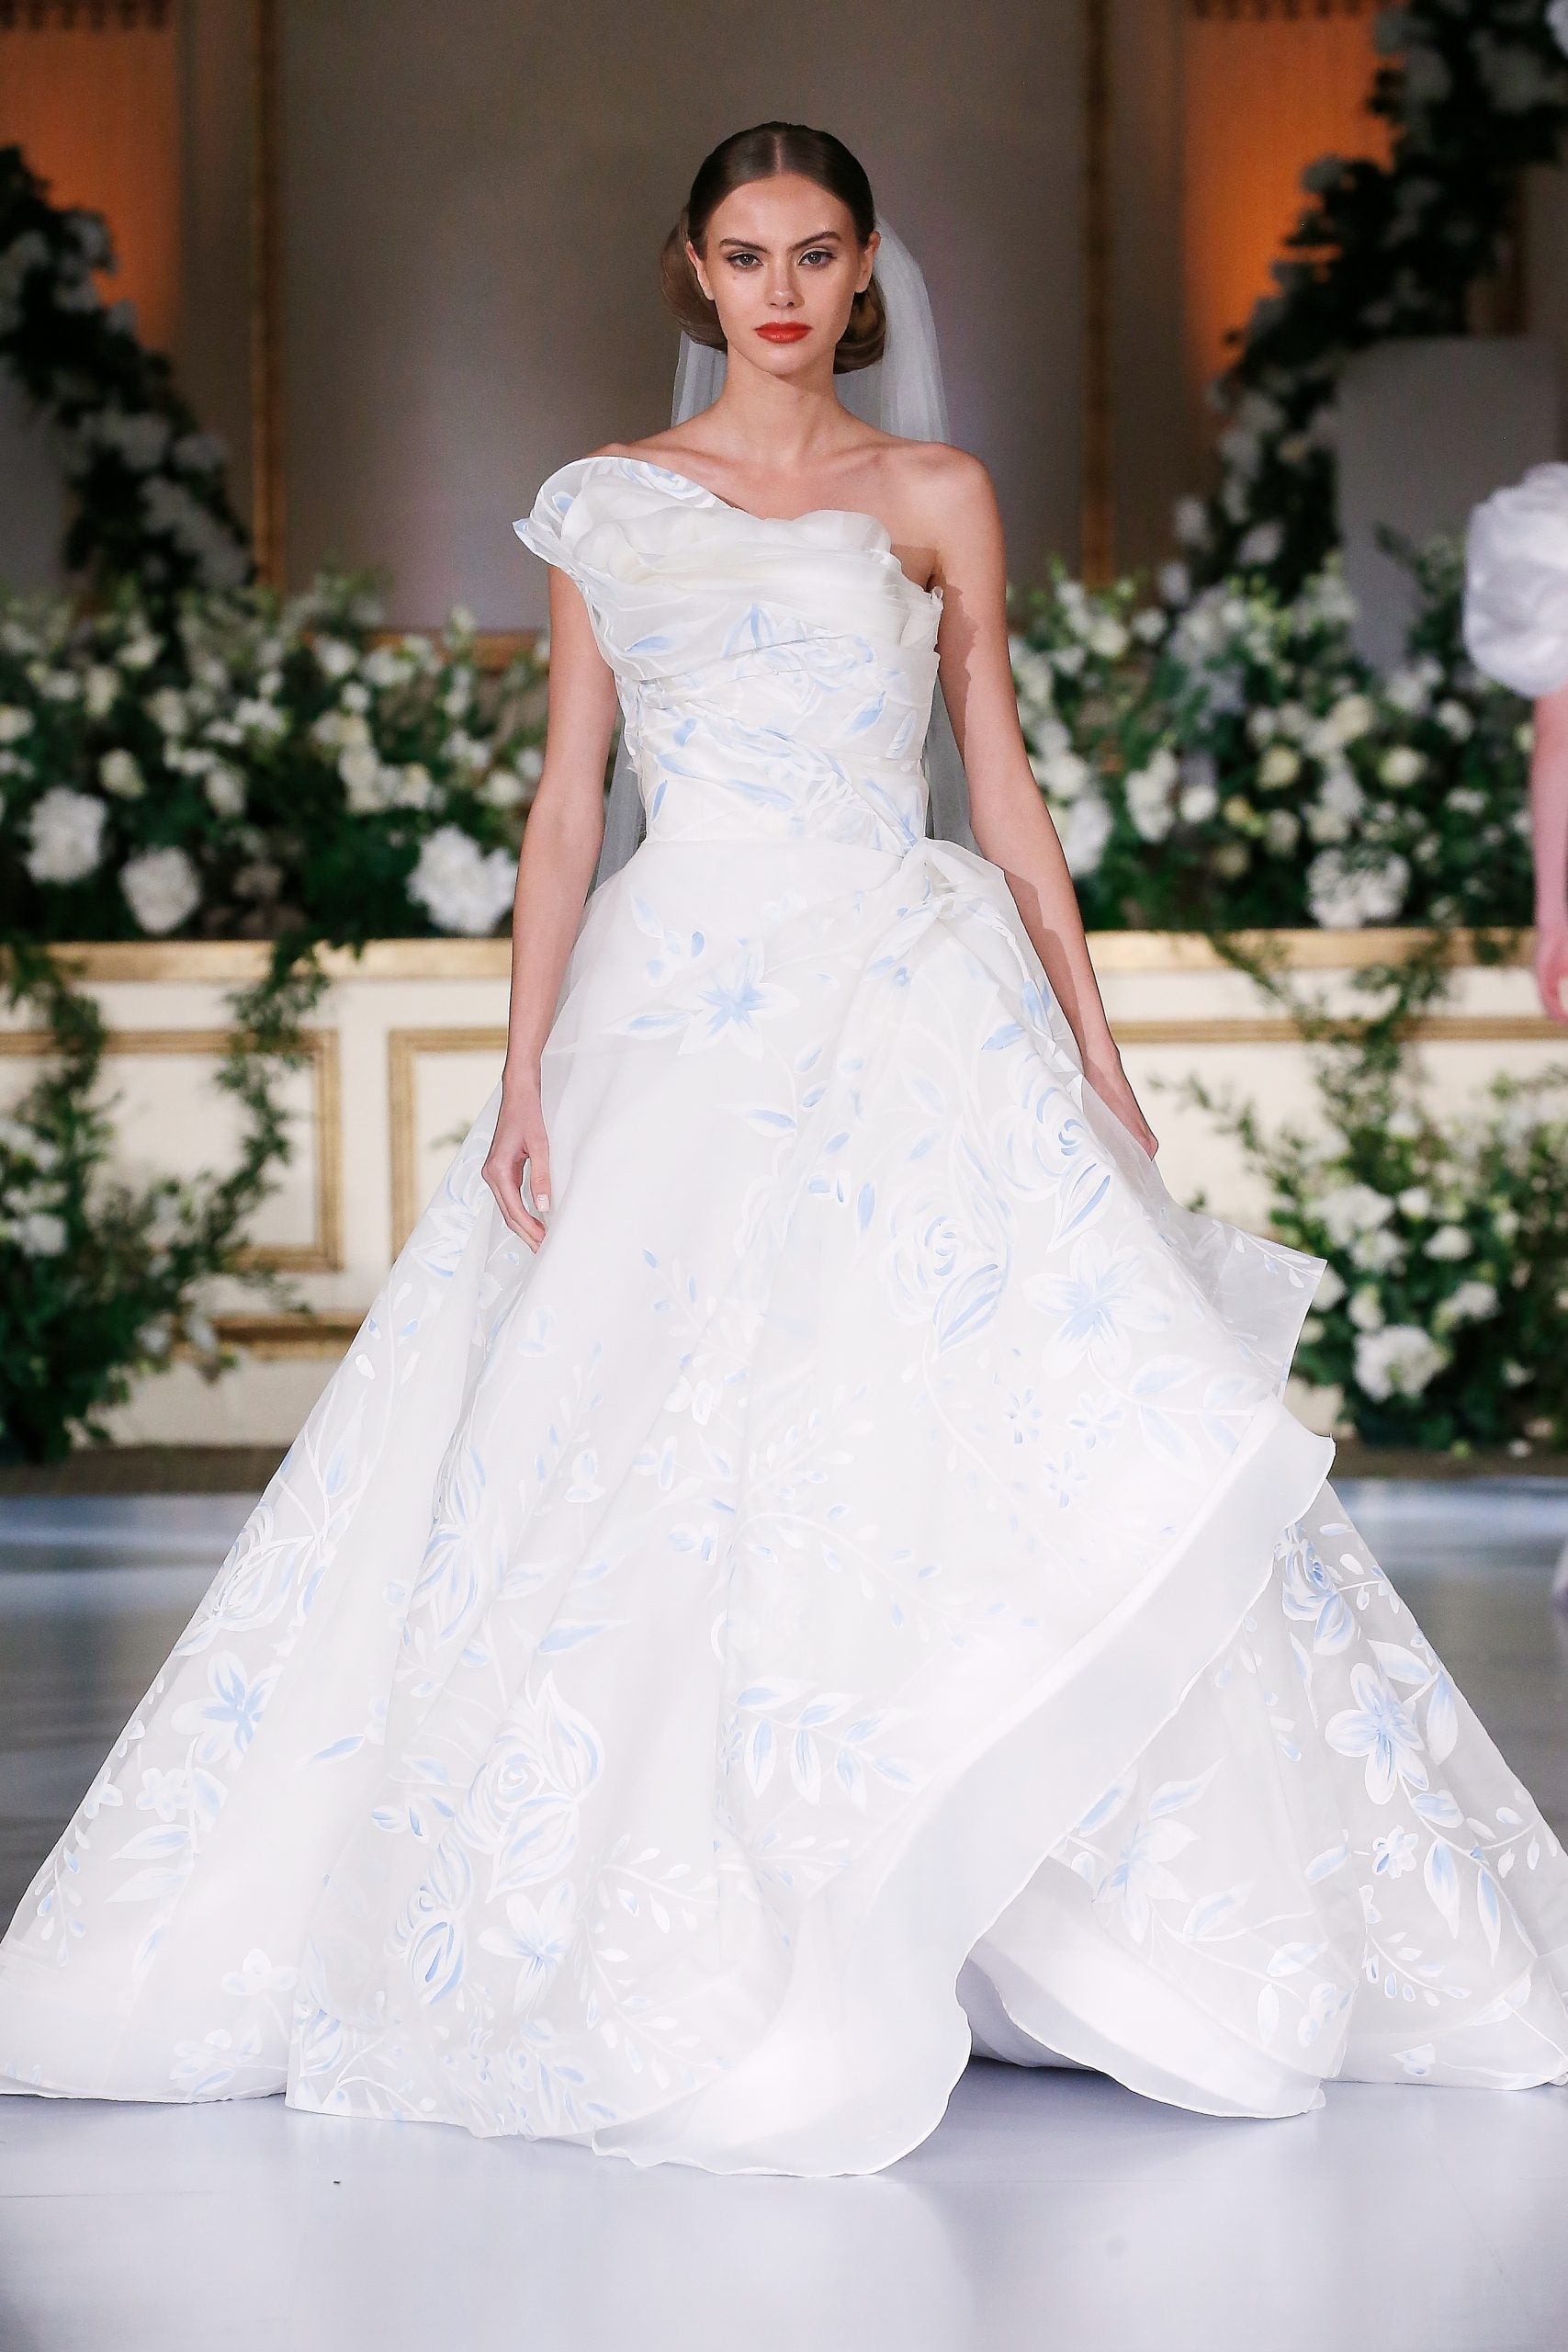 Hand-Painted Blue Organza Ball Gown by Nardos - Image 1